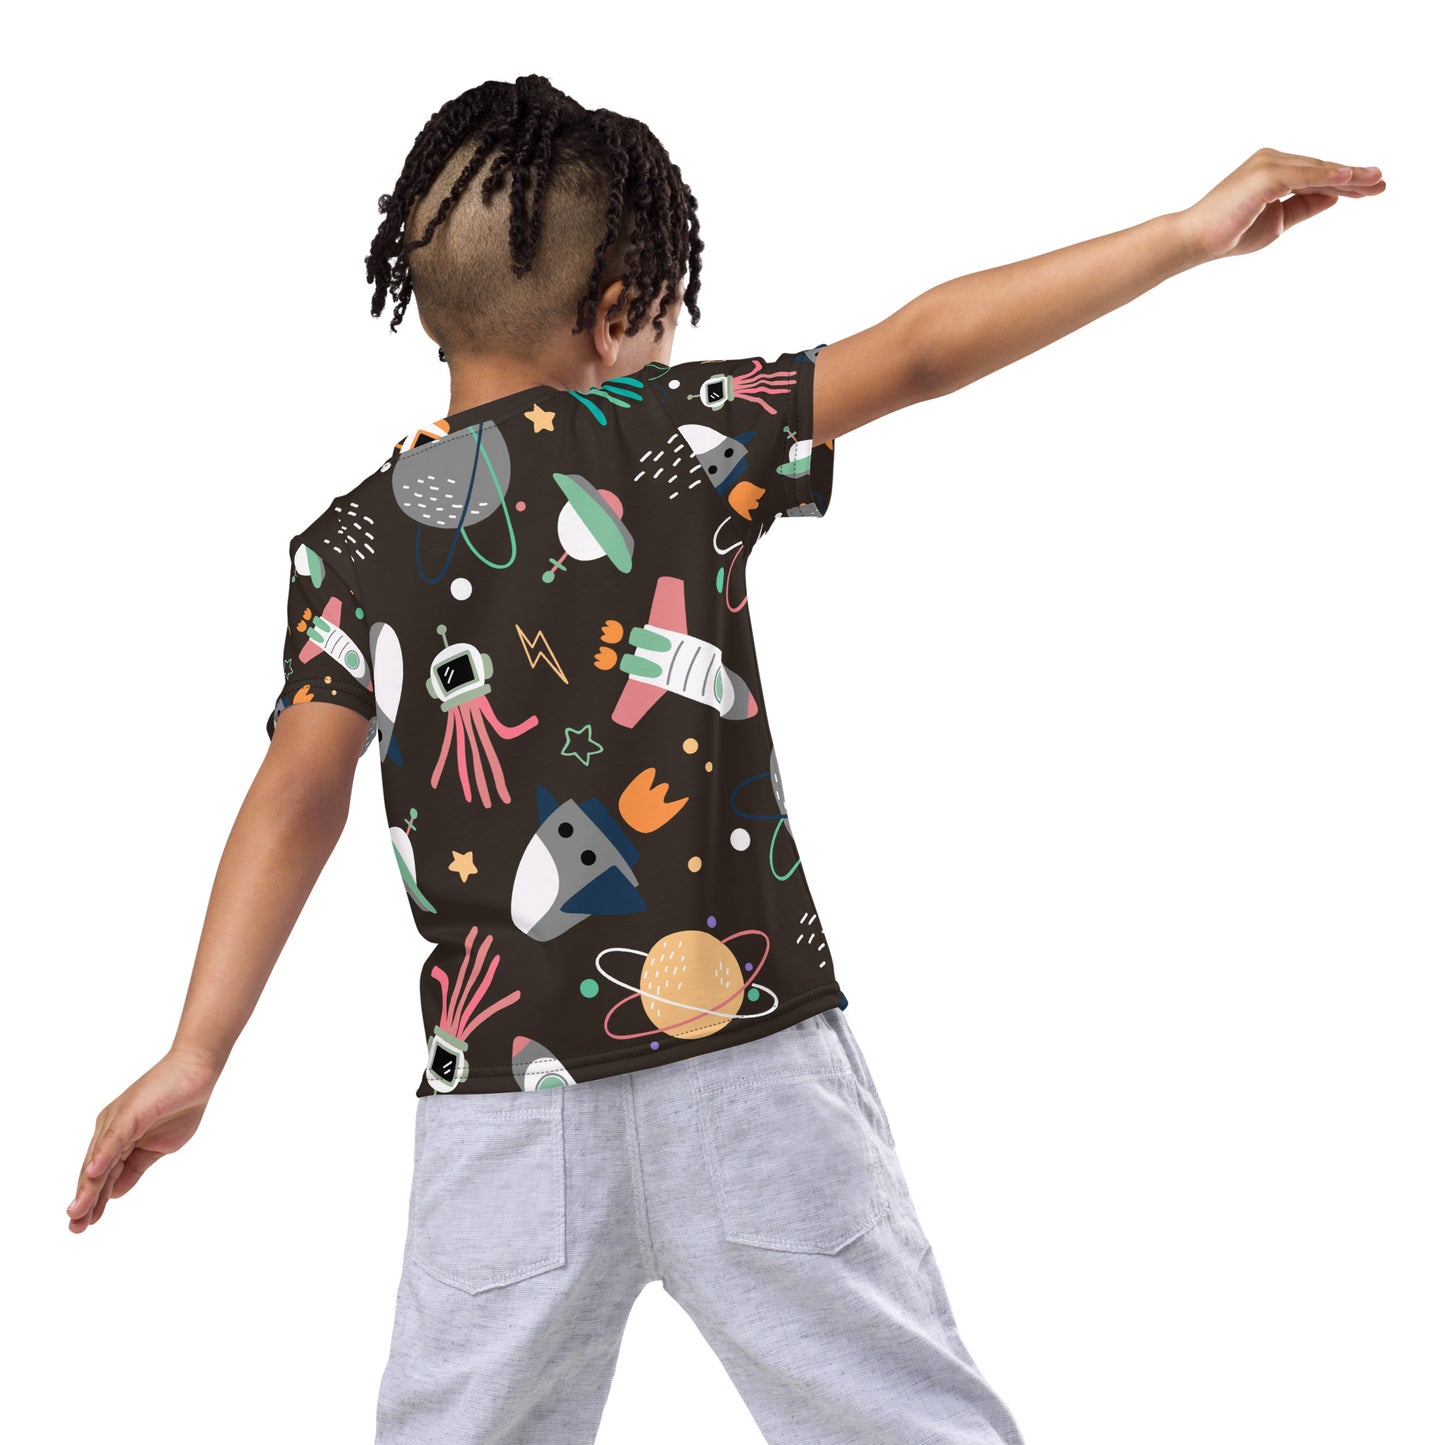 "Spaced Out" Kids T-shirt